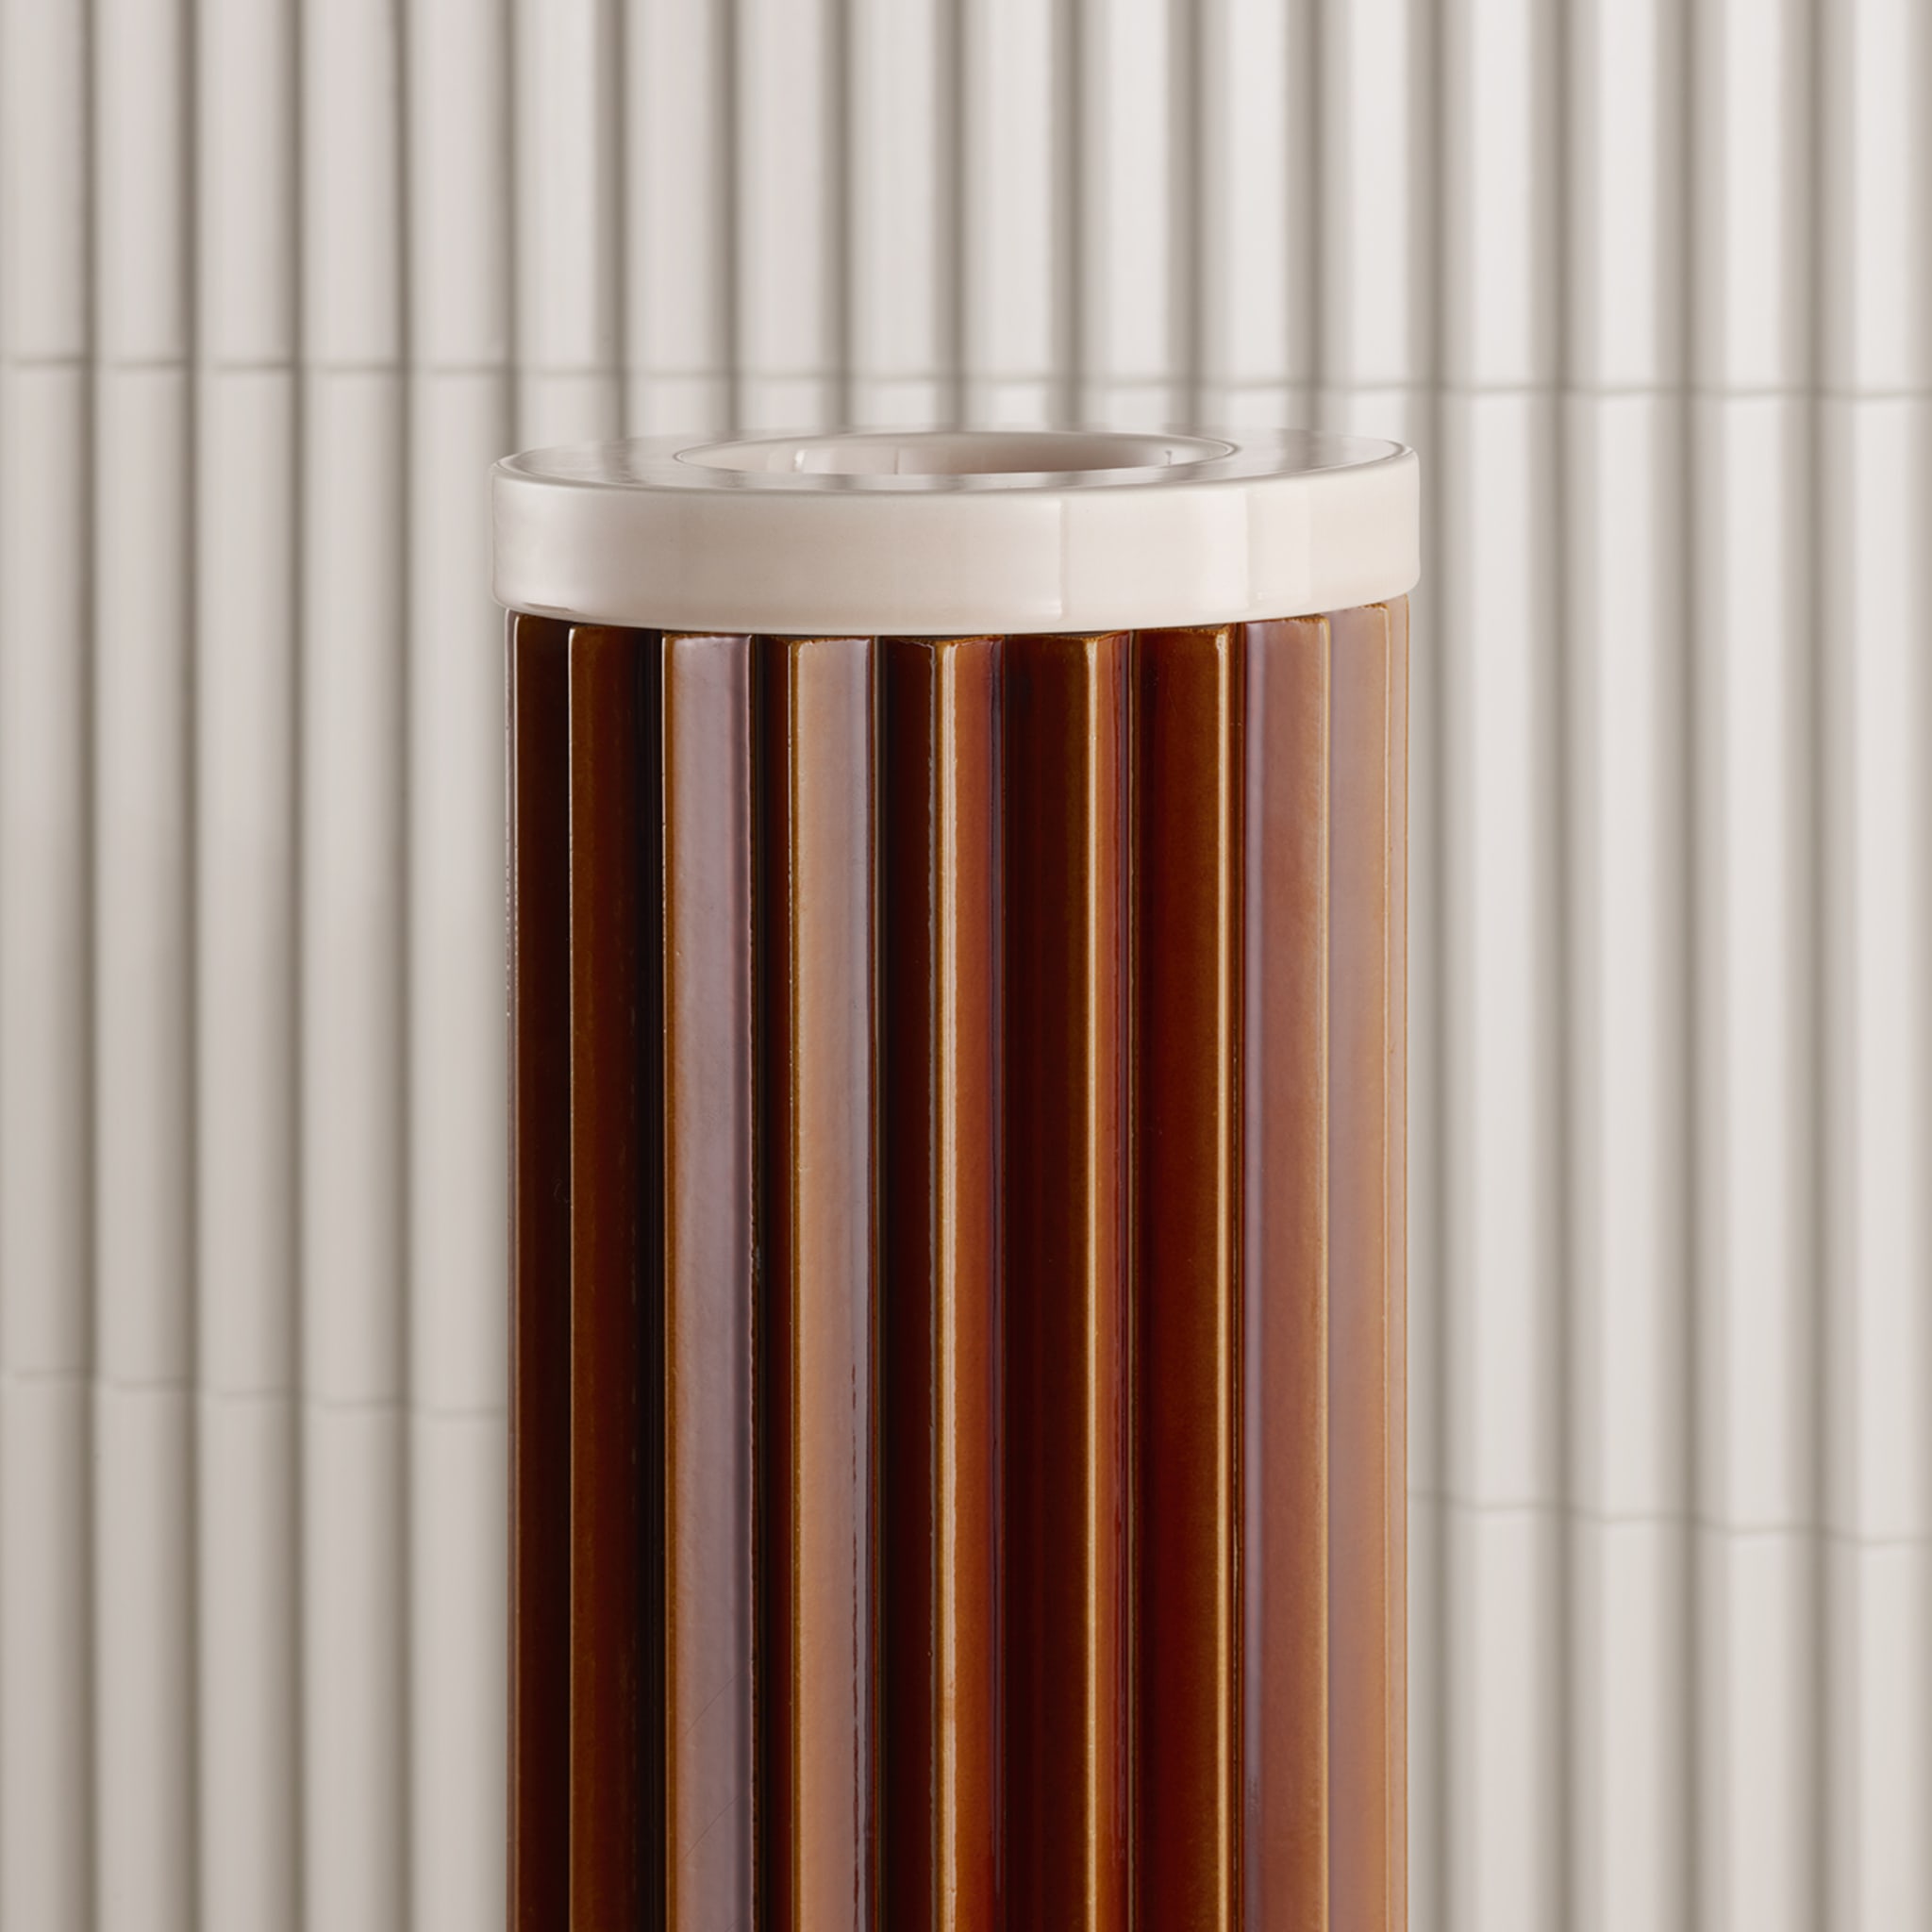 Rombini A Brown and Rose Vase by Ronan & Erwan Bouroullec - Alternative view 1